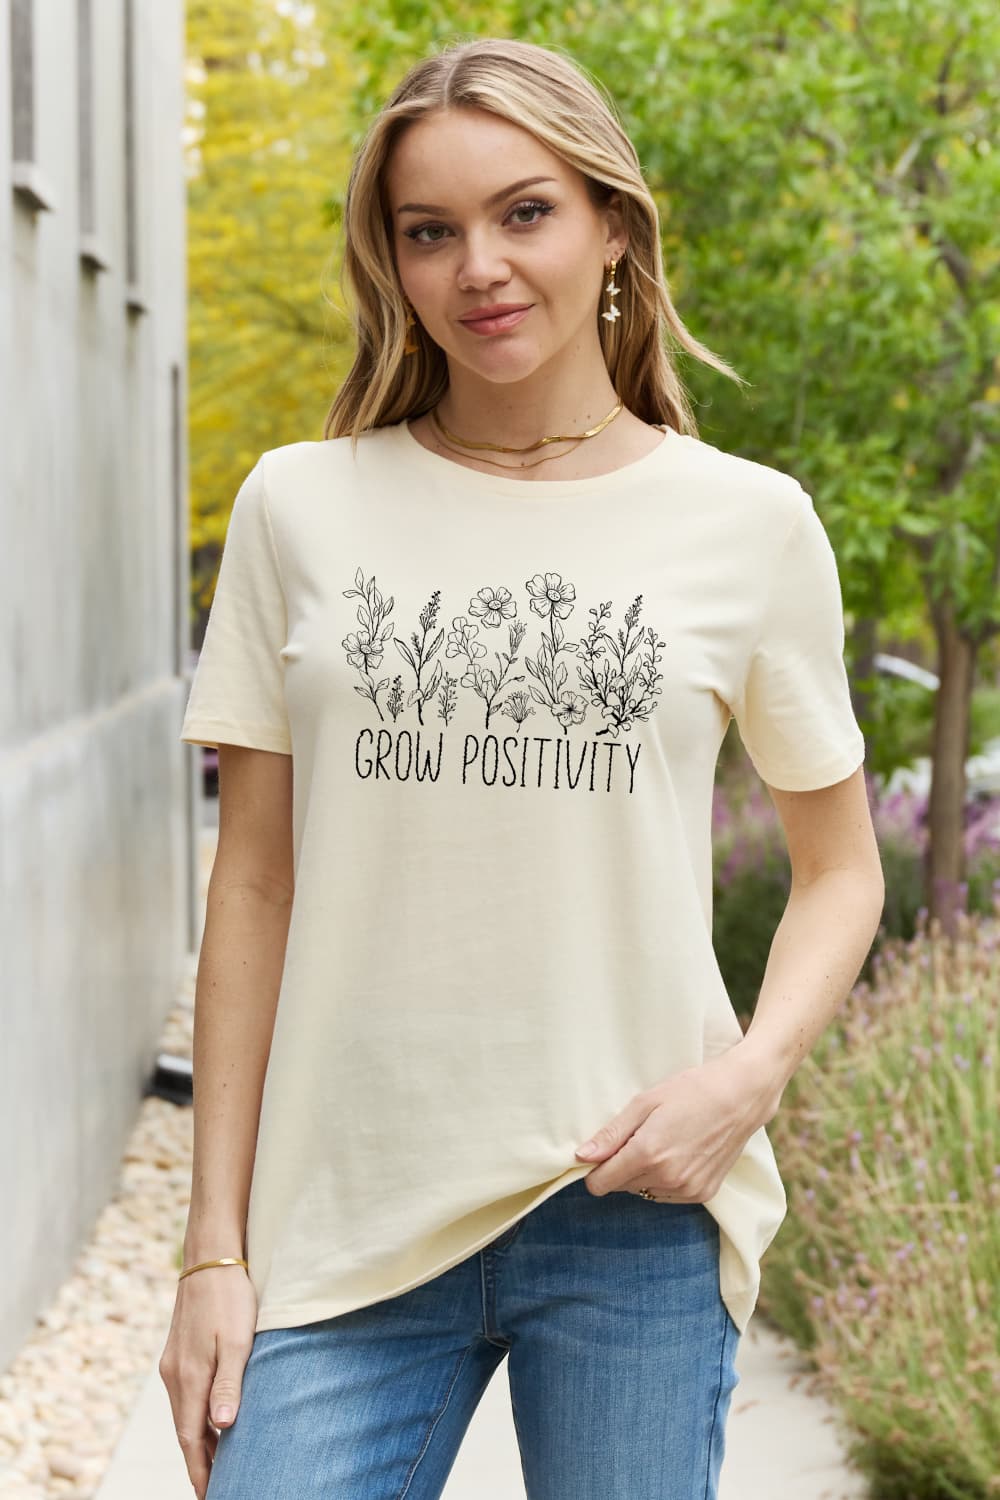 Gray Simply Love GROW POSITIVITY Graphic Cotton Tee Sentient Beauty Fashions tees